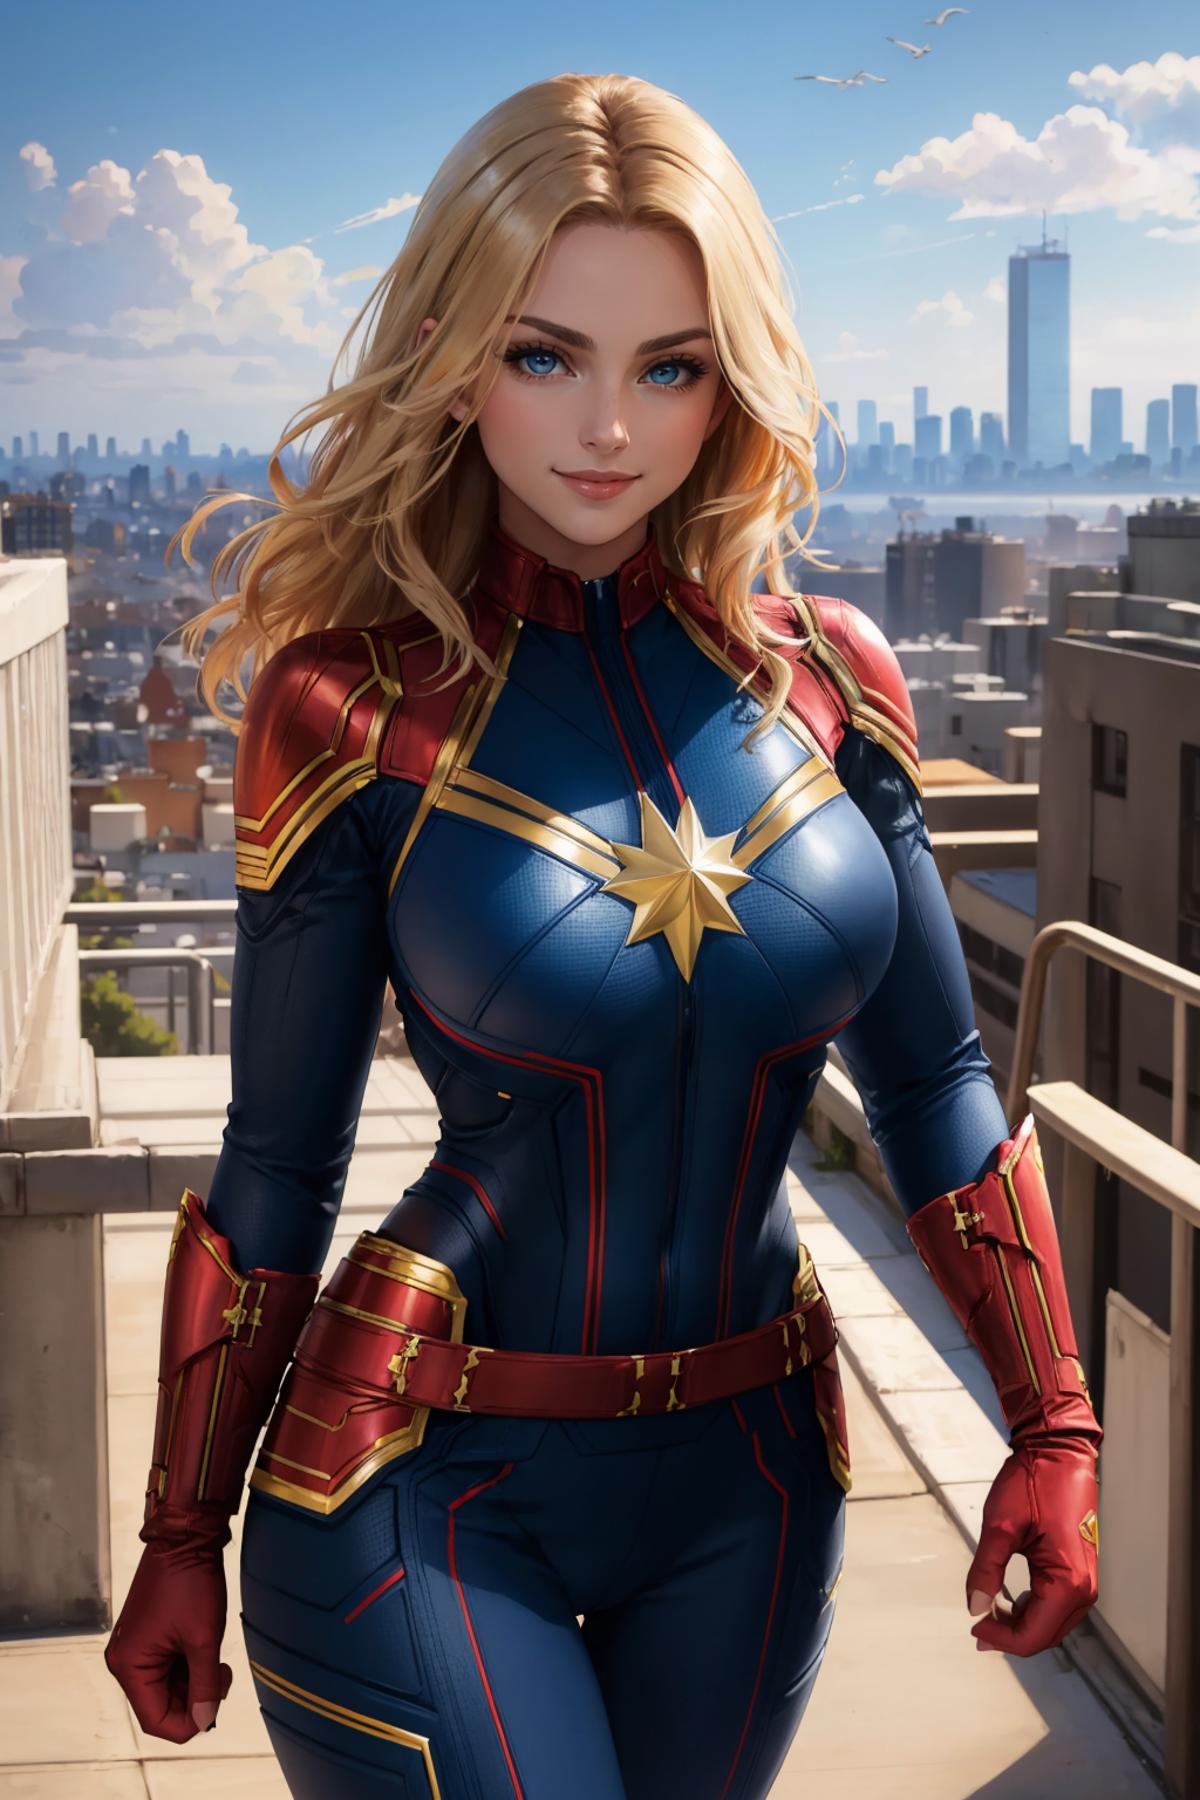 A CGI rendering of a blonde woman in a blue and red Captain Marvel costume.